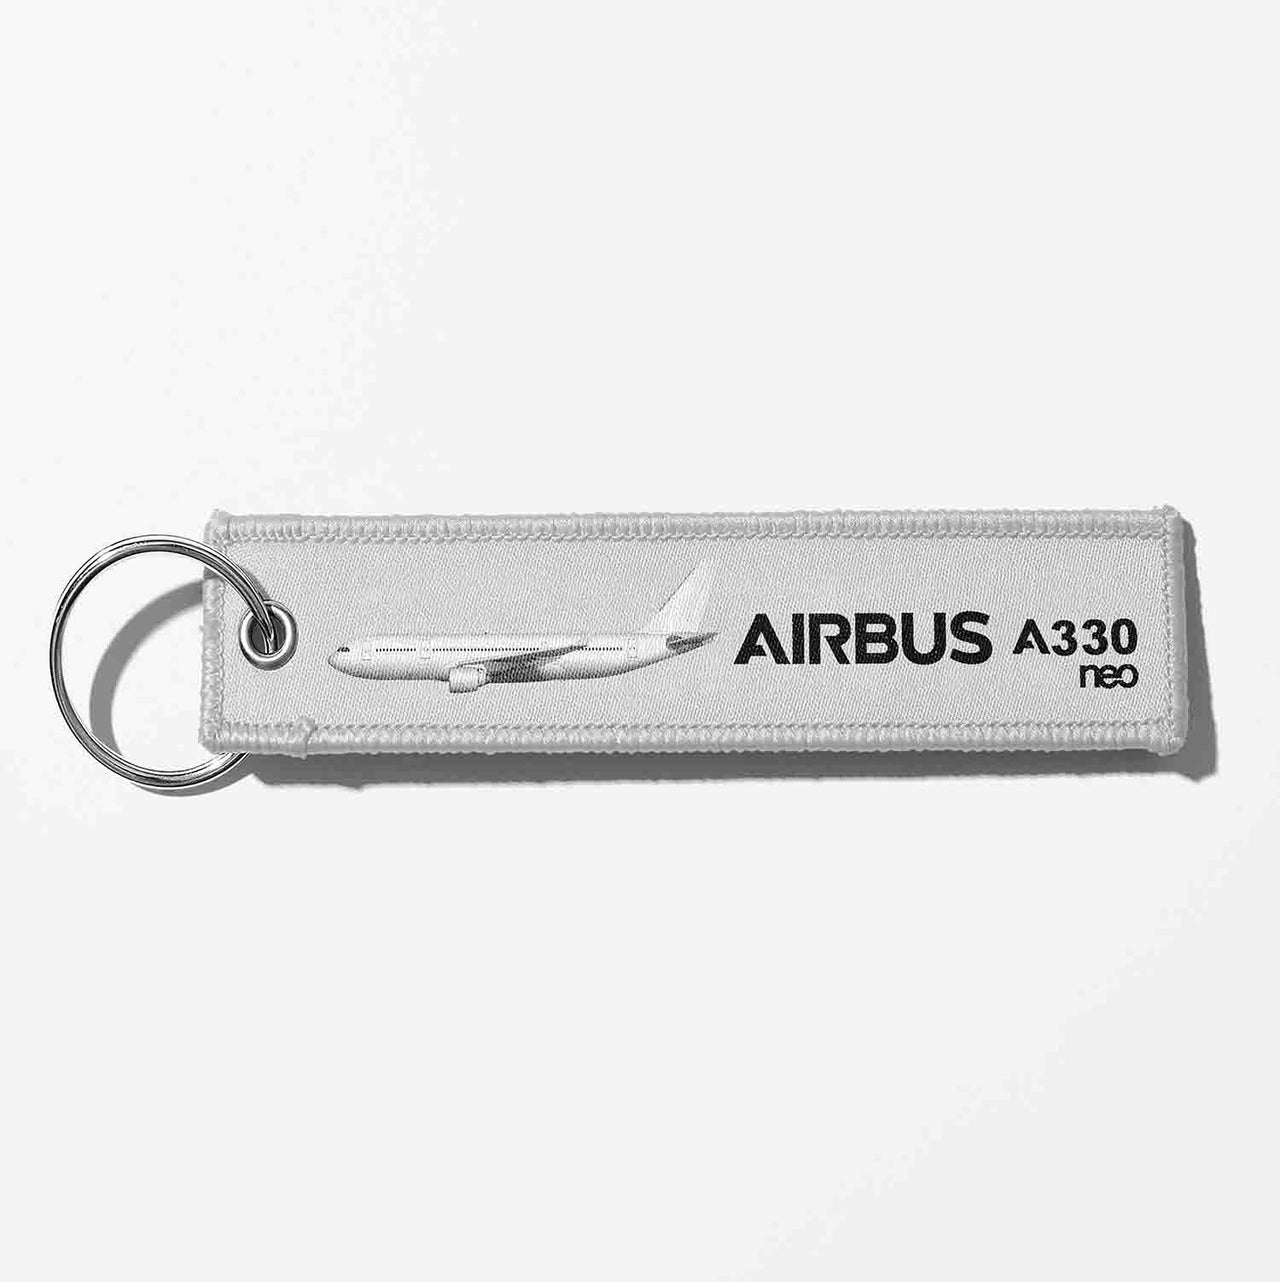 The Airbus A330neo Designed Key Chains